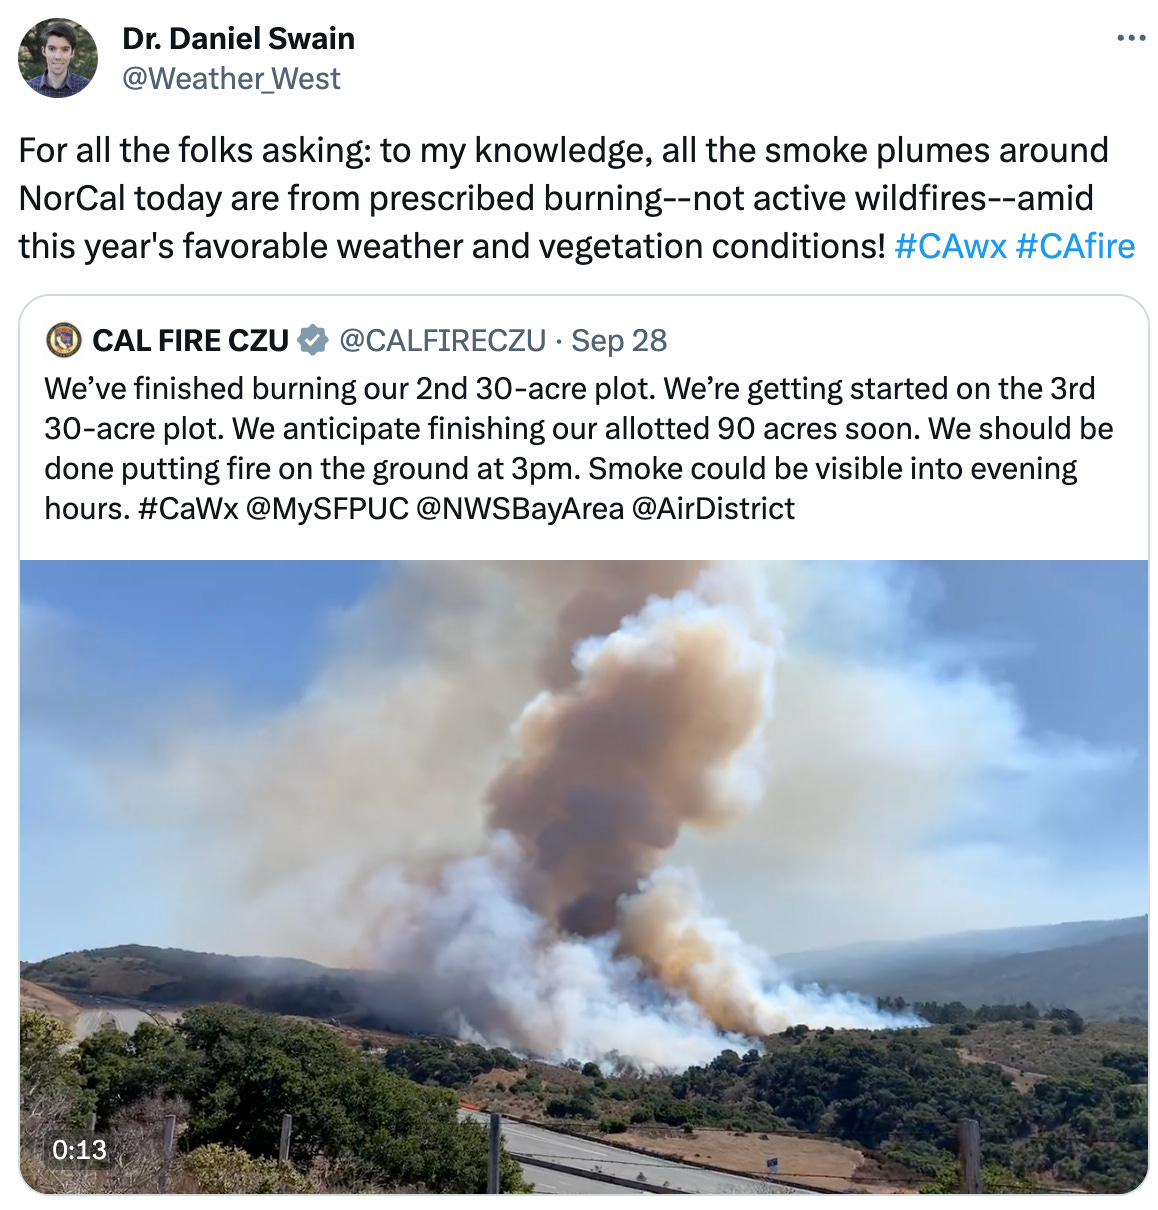  Dr. Daniel Swain @Weather_West For all the folks asking: to my knowledge, all the smoke plumes around NorCal today are from prescribed burning--not active wildfires--amid this year's favorable weather and vegetation conditions! #CAwx #CAfire Quote CAL FIRE CZU @CALFIRECZU · Sep 28 We’ve finished burning our 2nd 30-acre plot. We’re getting started on the 3rd 30-acre plot. We anticipate finishing our allotted 90 acres soon. We should be done putting fire on the ground at 3pm. Smoke could be visible into evening hours. #CaWx @MySFPUC @NWSBayArea @AirDistrict